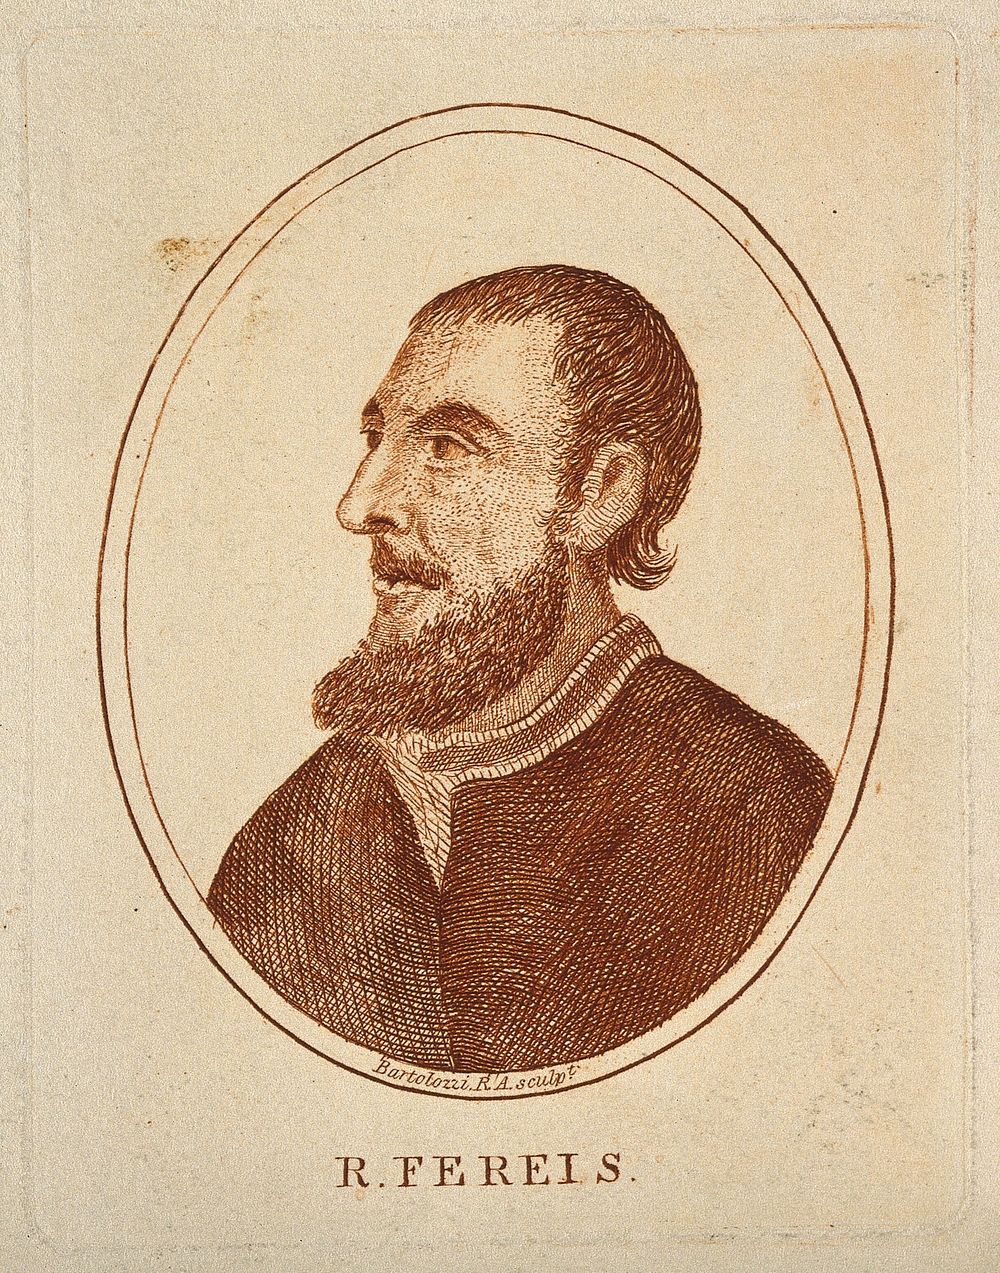 Richard Ferris. Etching by F. Bartolozzi after B. Baron, 1736, after H. Holbein.